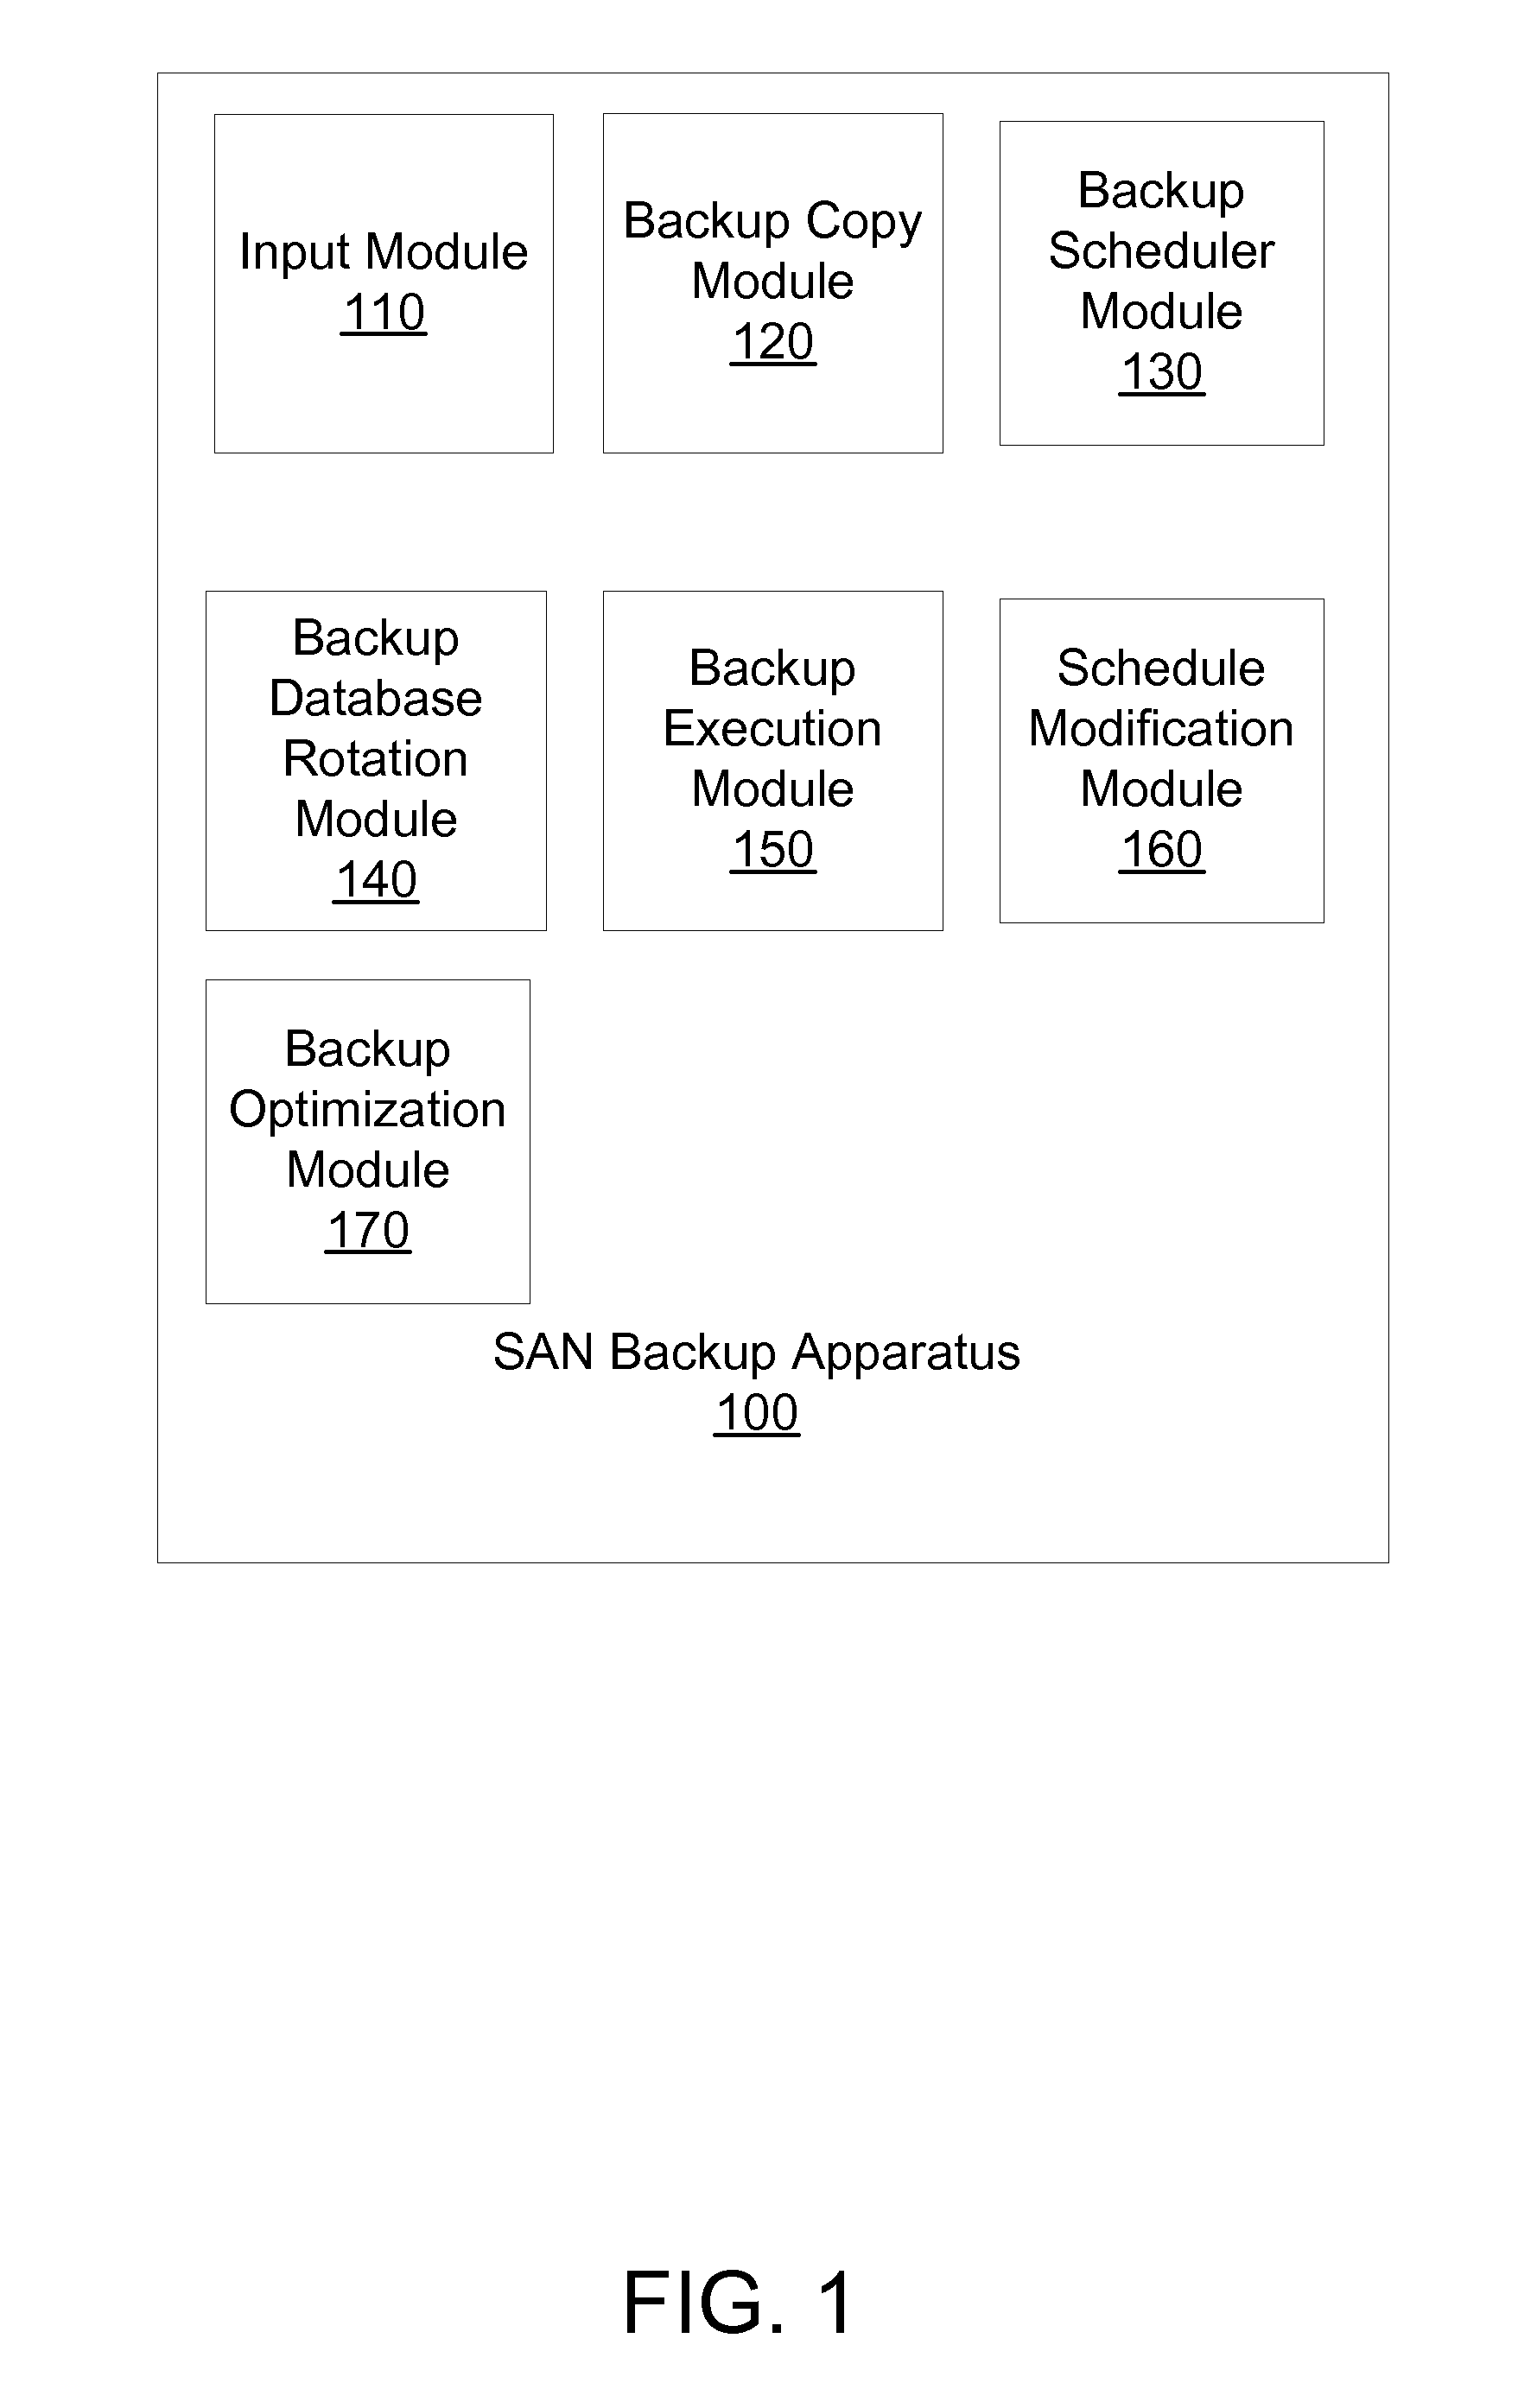 Apparatus, system, and method for creating a backup schedule in a san environment based on a recovery plan